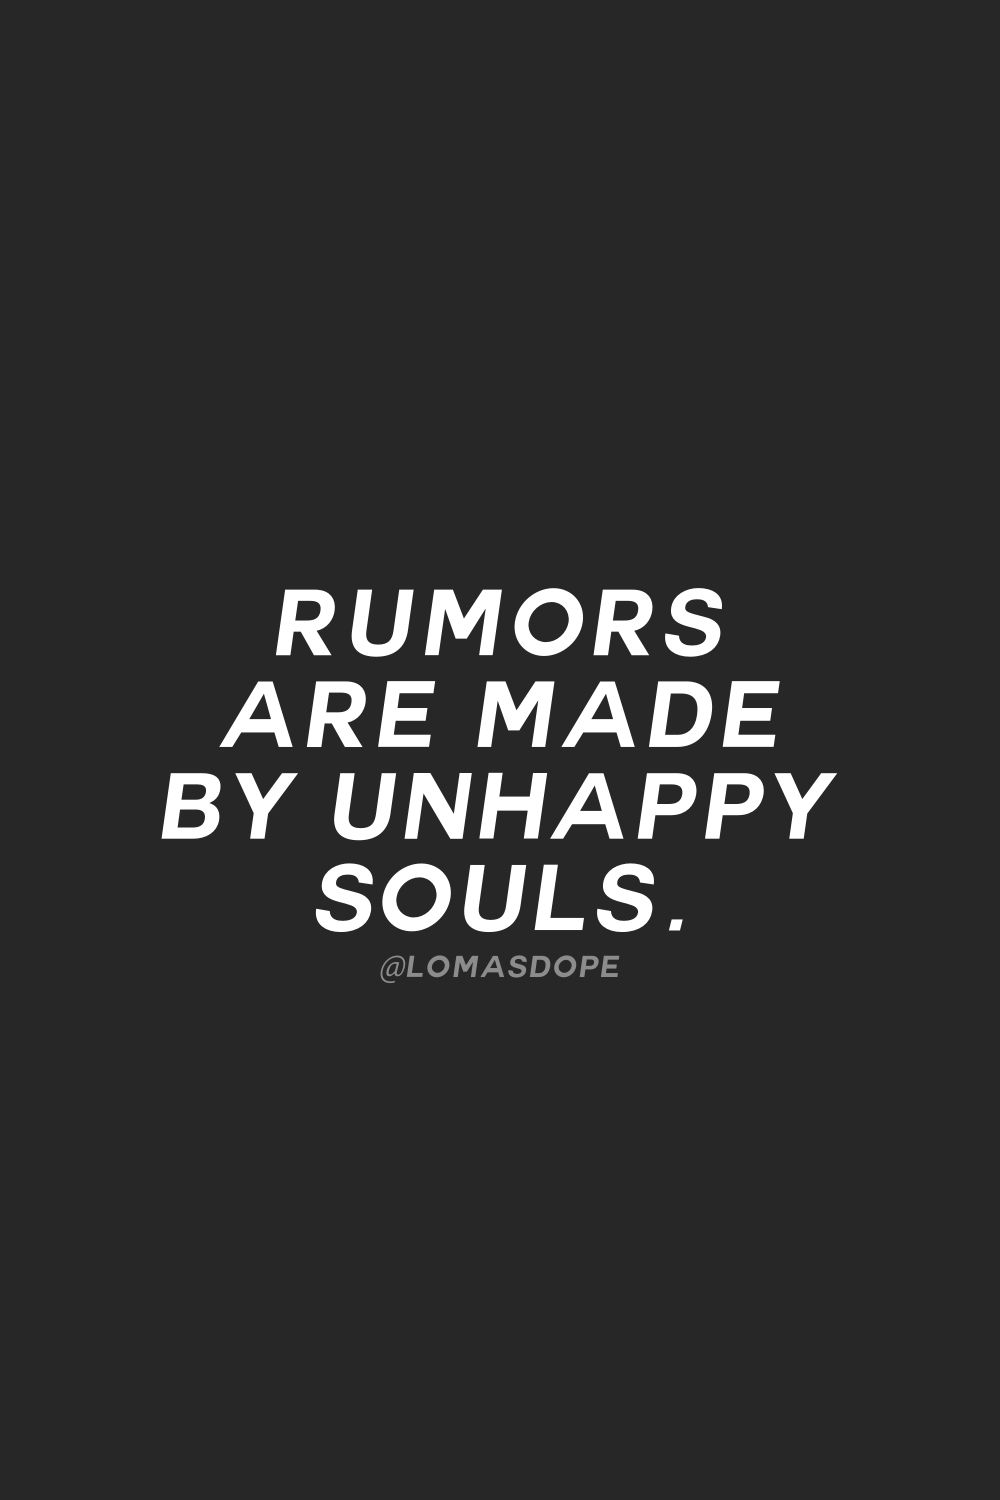 Rumor are made by unhappy souls.